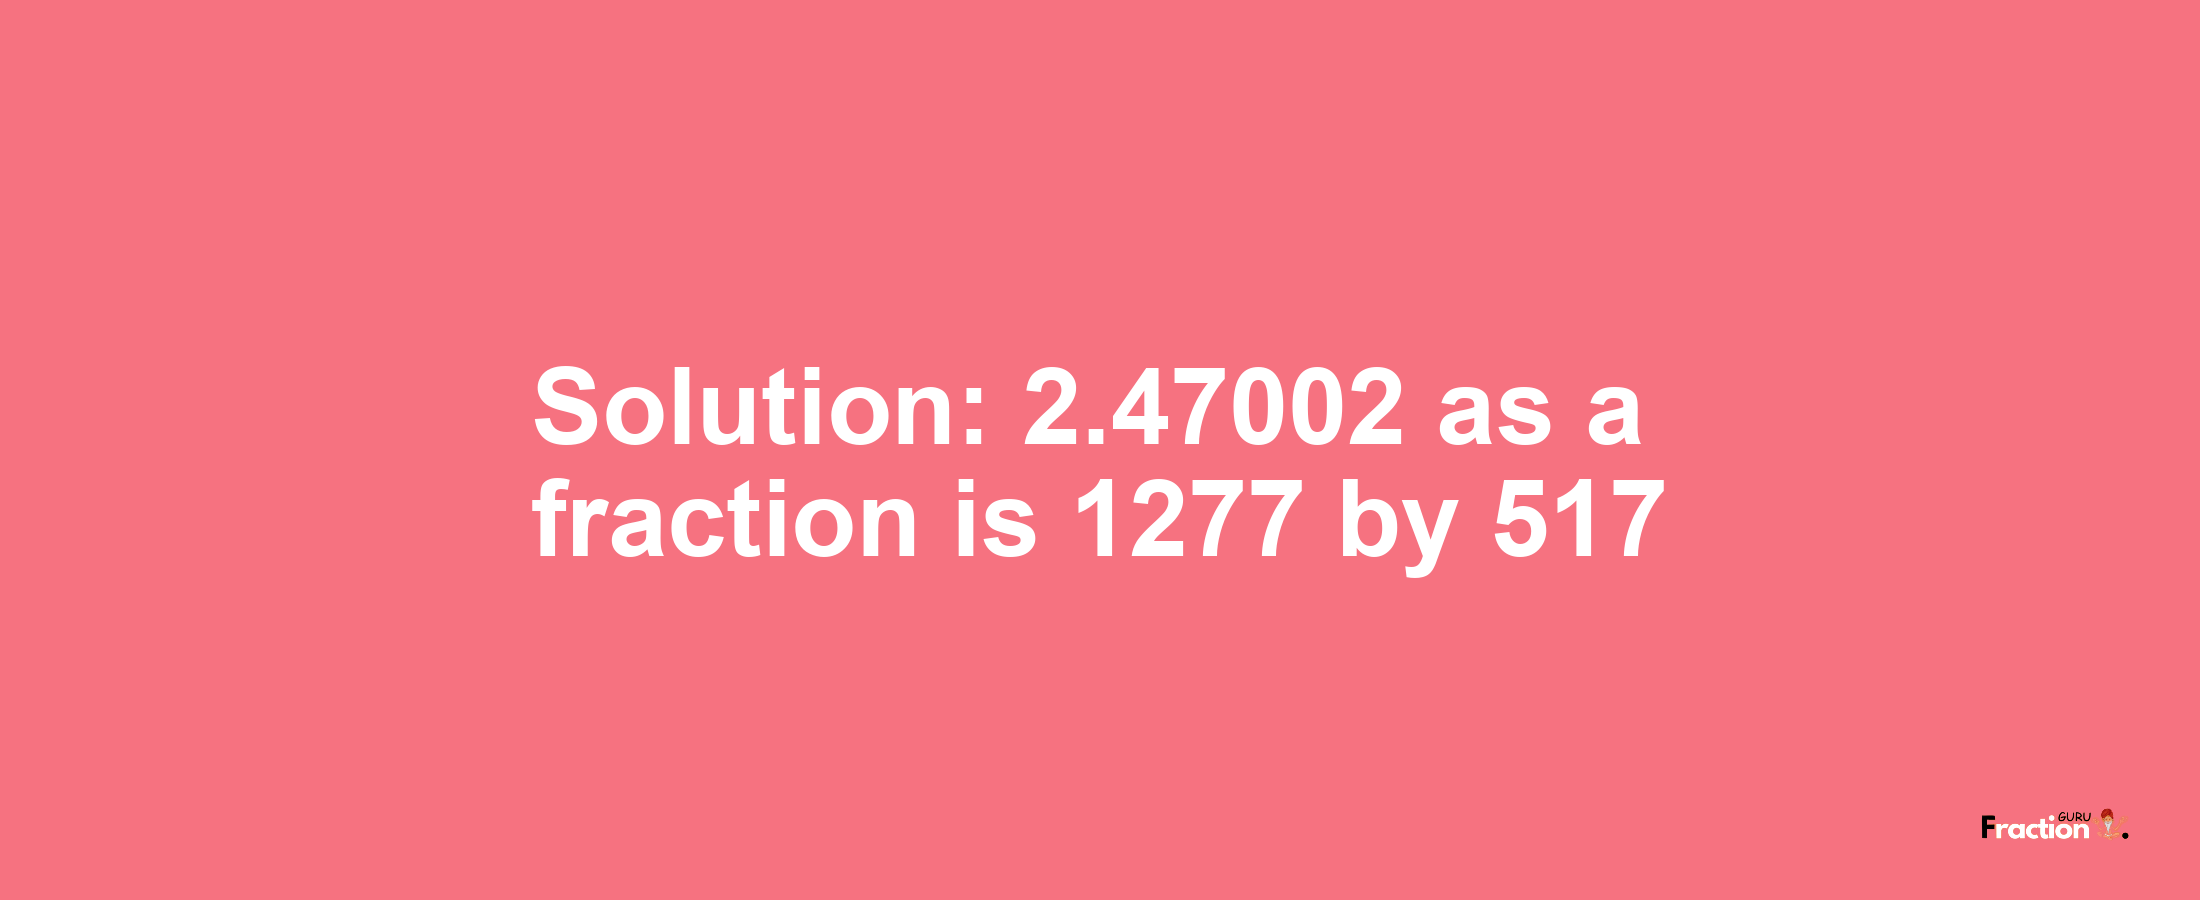 Solution:2.47002 as a fraction is 1277/517